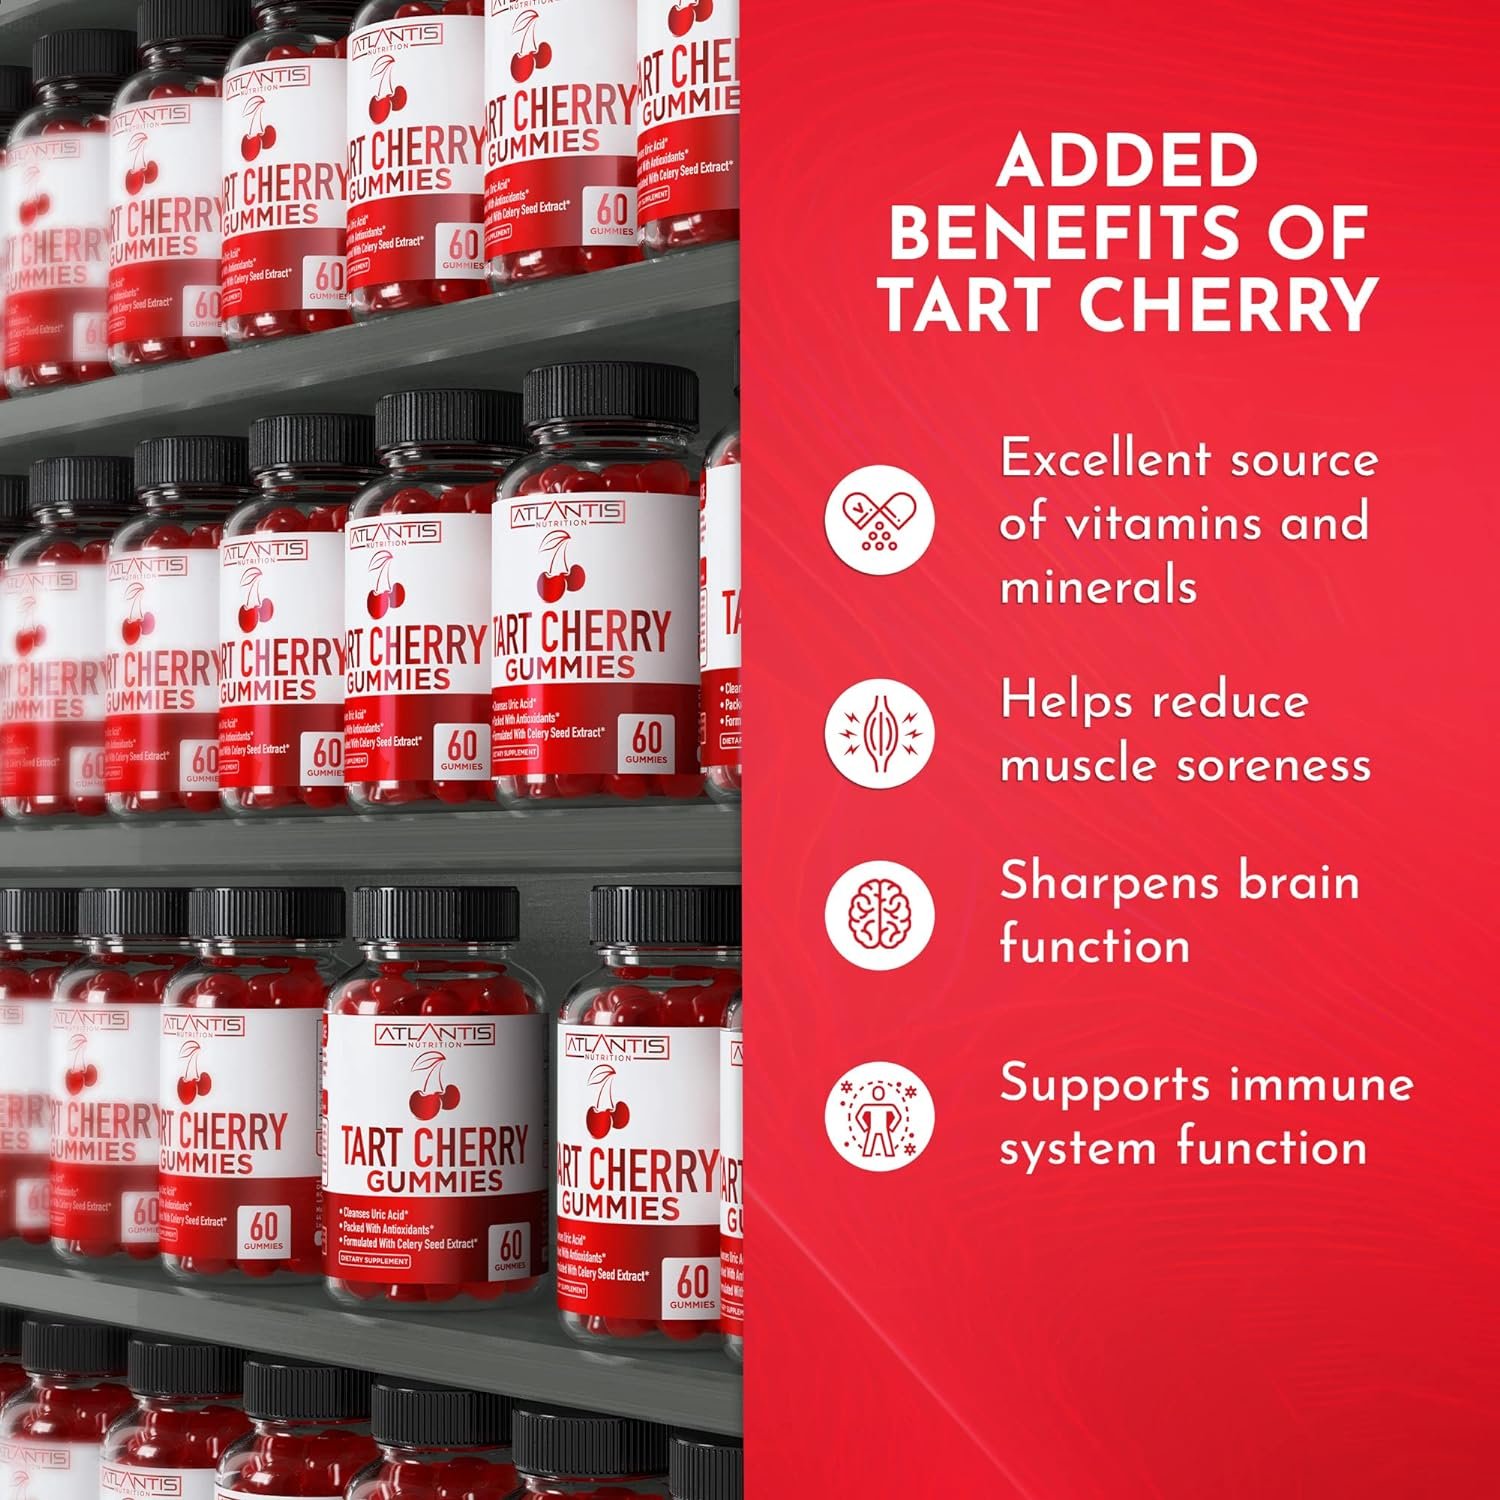 Tart Cherry Gummies with Celery Seed Extract - Advanced Uric Acid Cleanse for Immediate Gout Relief. Powerful Antioxidant with Joint Support - 60 Gummies